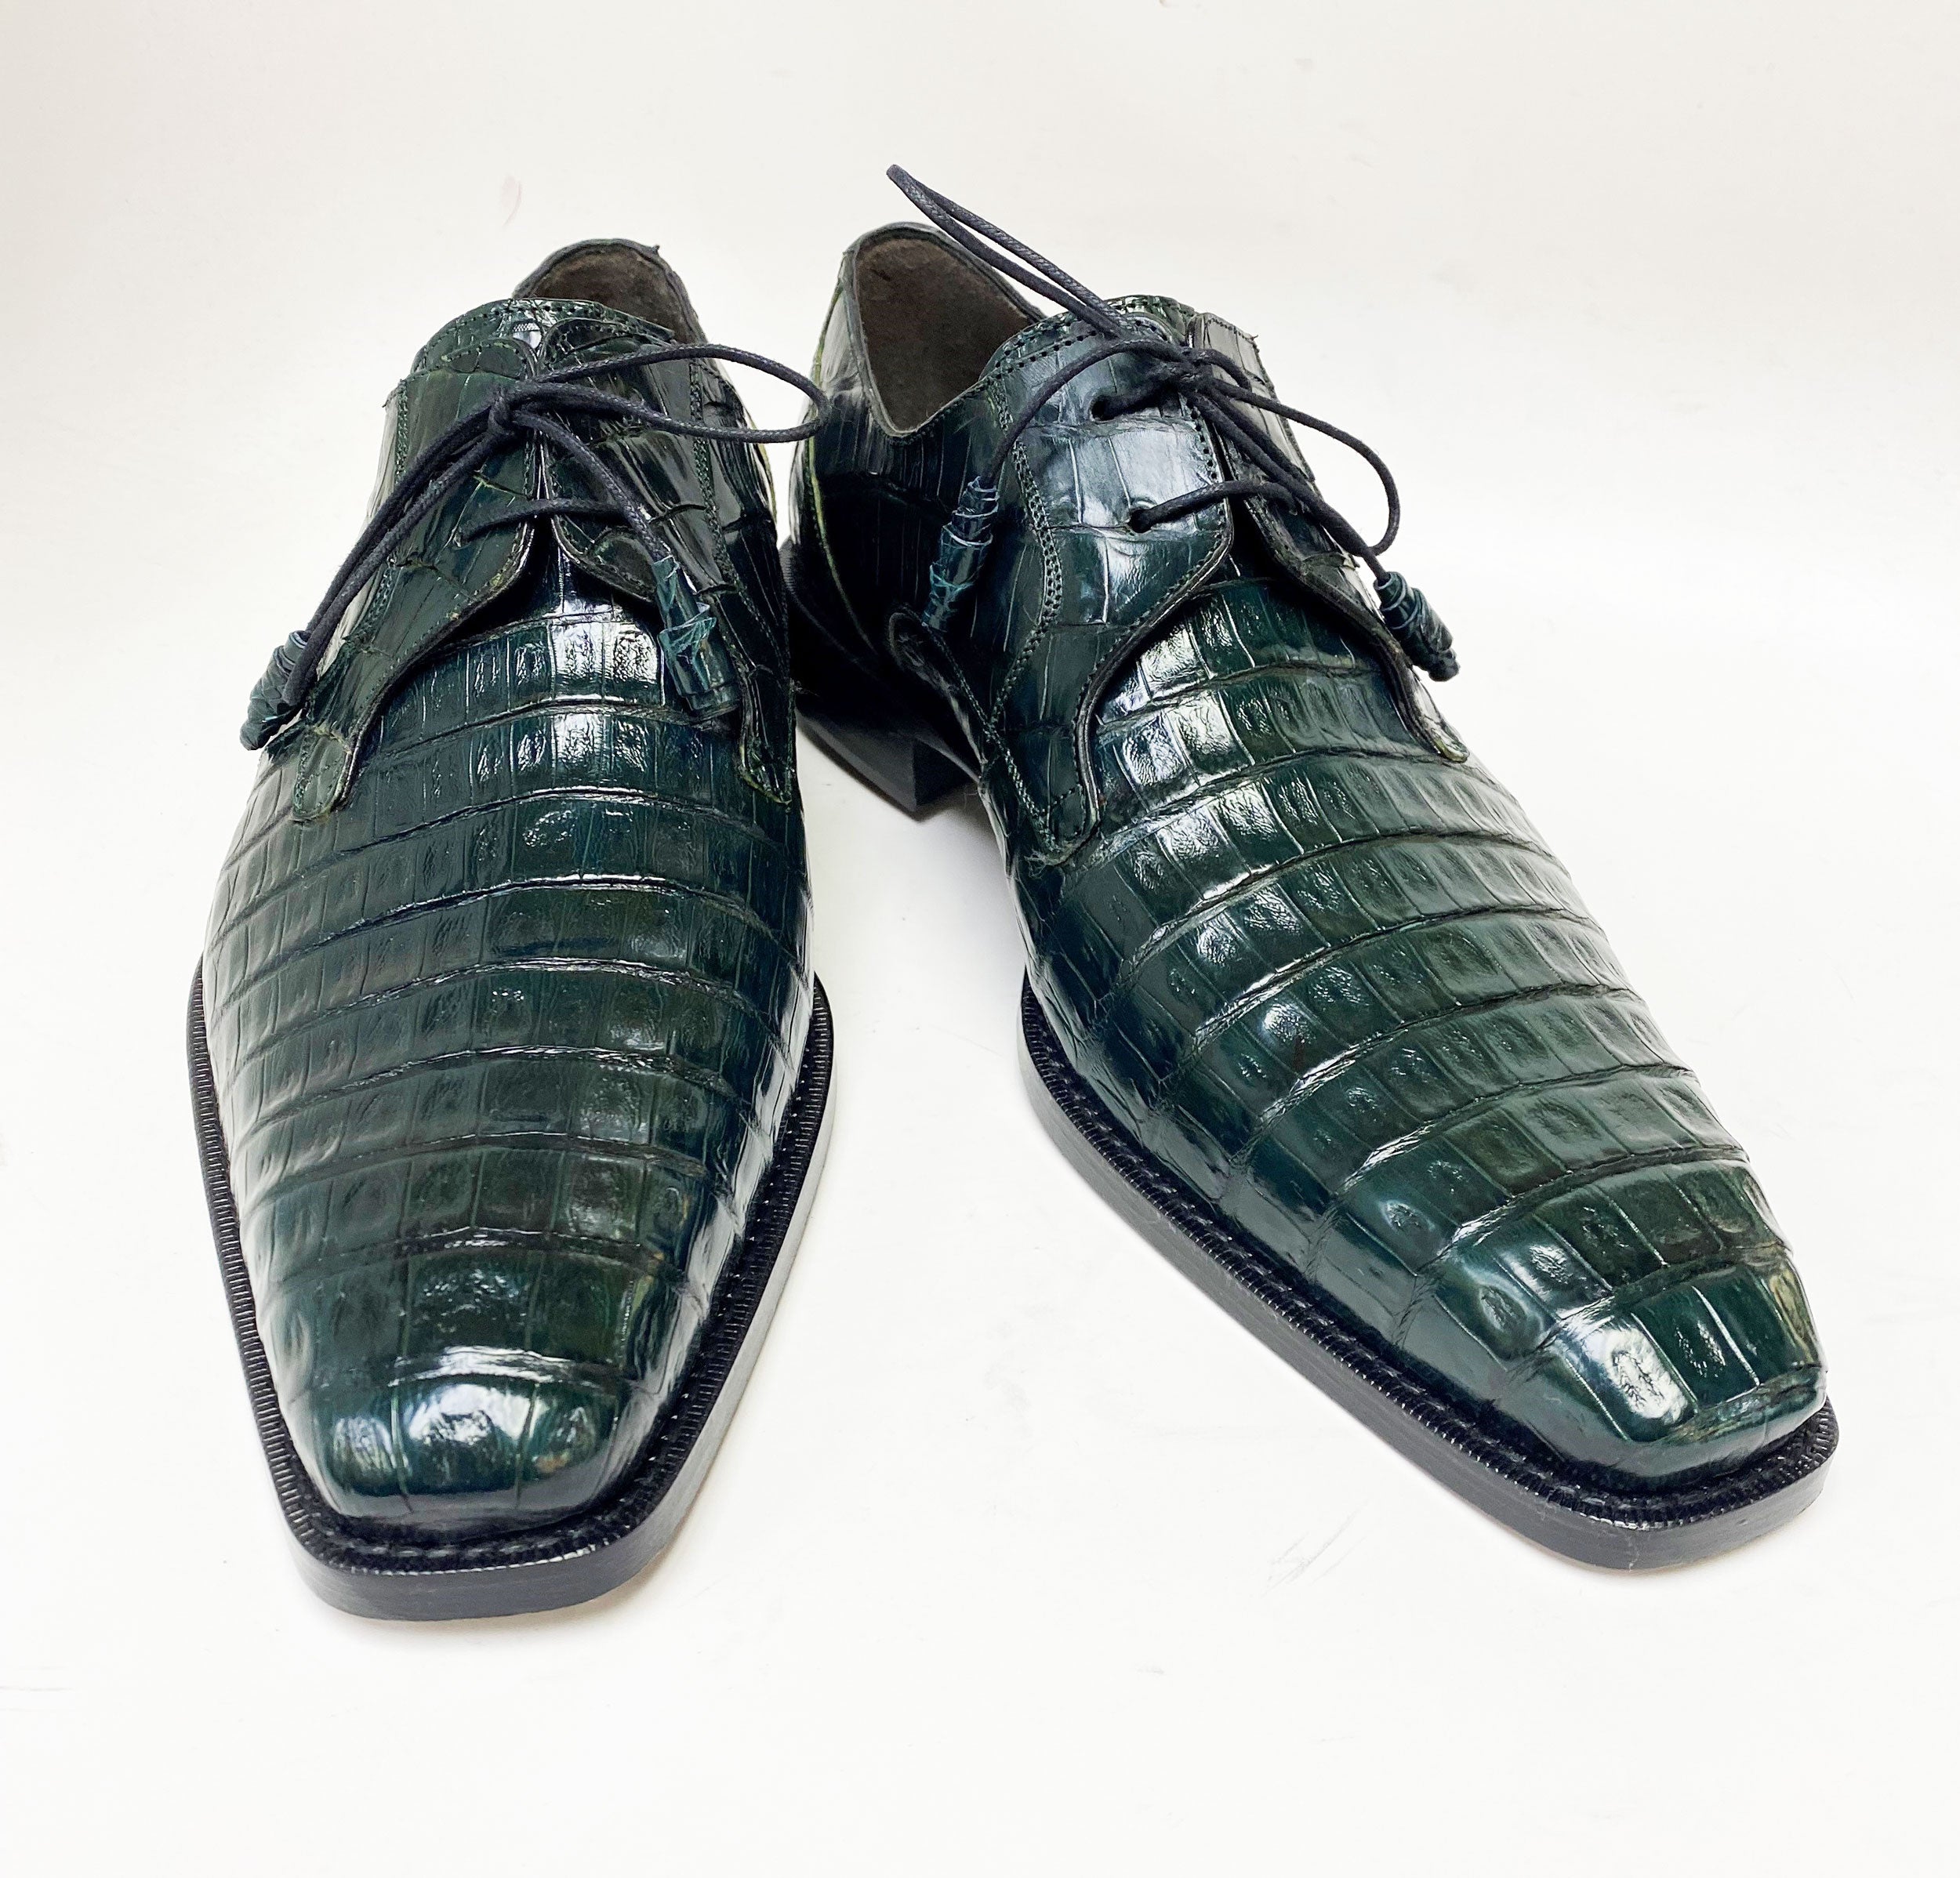 Men's Lace-Up Crocodile Alligator Leather Sneakers